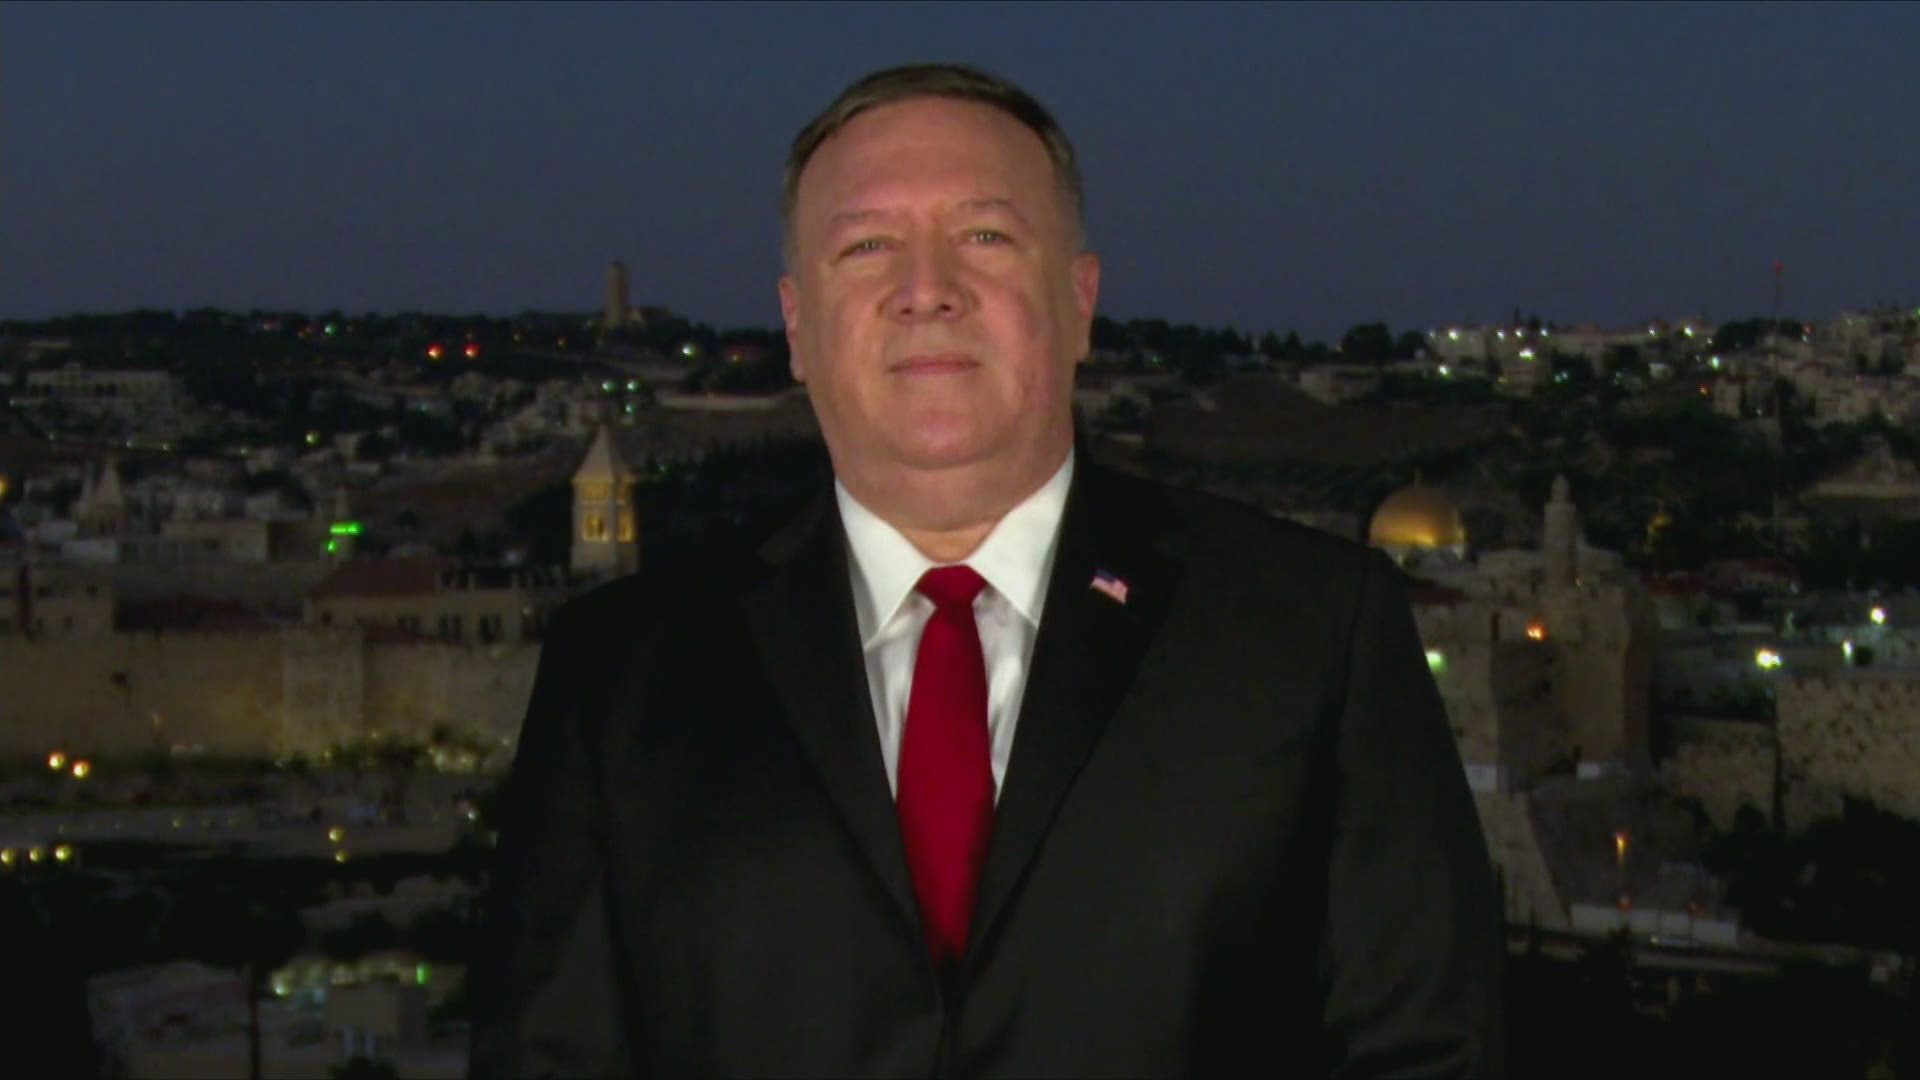 Secretary of State Mike Pompeo speaks at the Republican National Convention